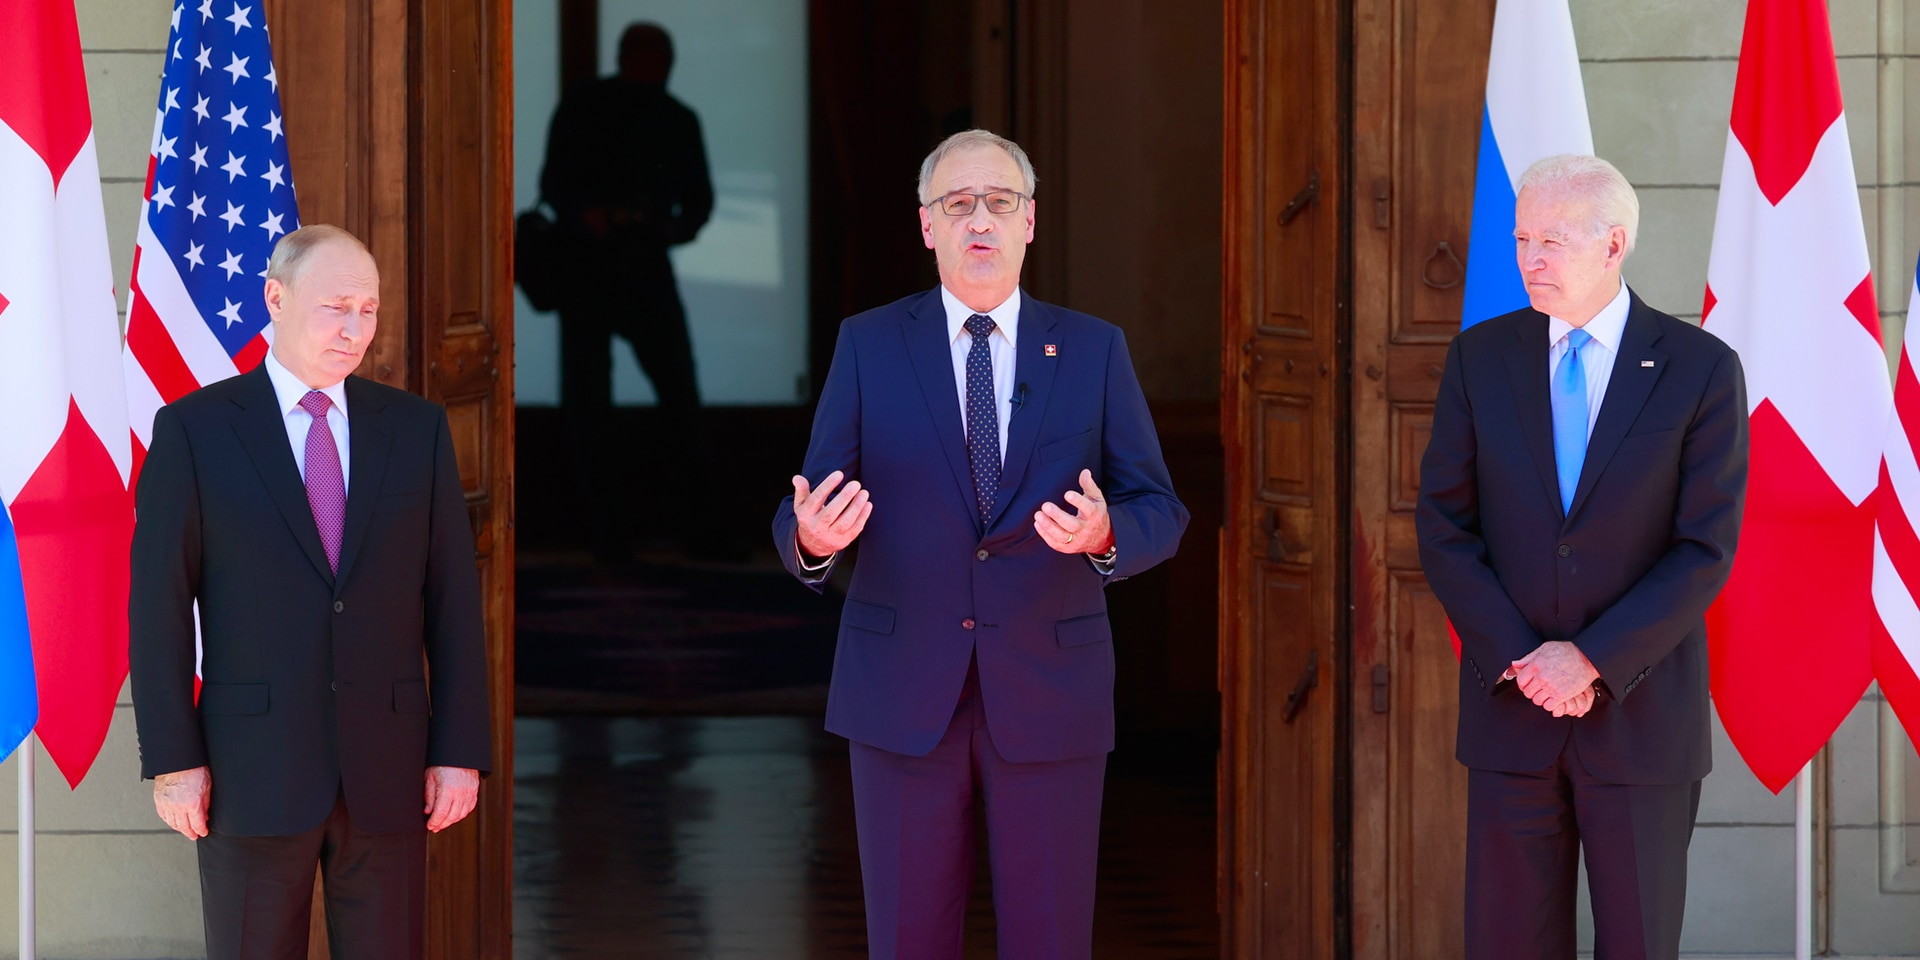 President of the Federal Council Guy Parmelin stands in front of the entrance, next to him Russian President Vladimir Putin (left) and US President Joe Biden (right).